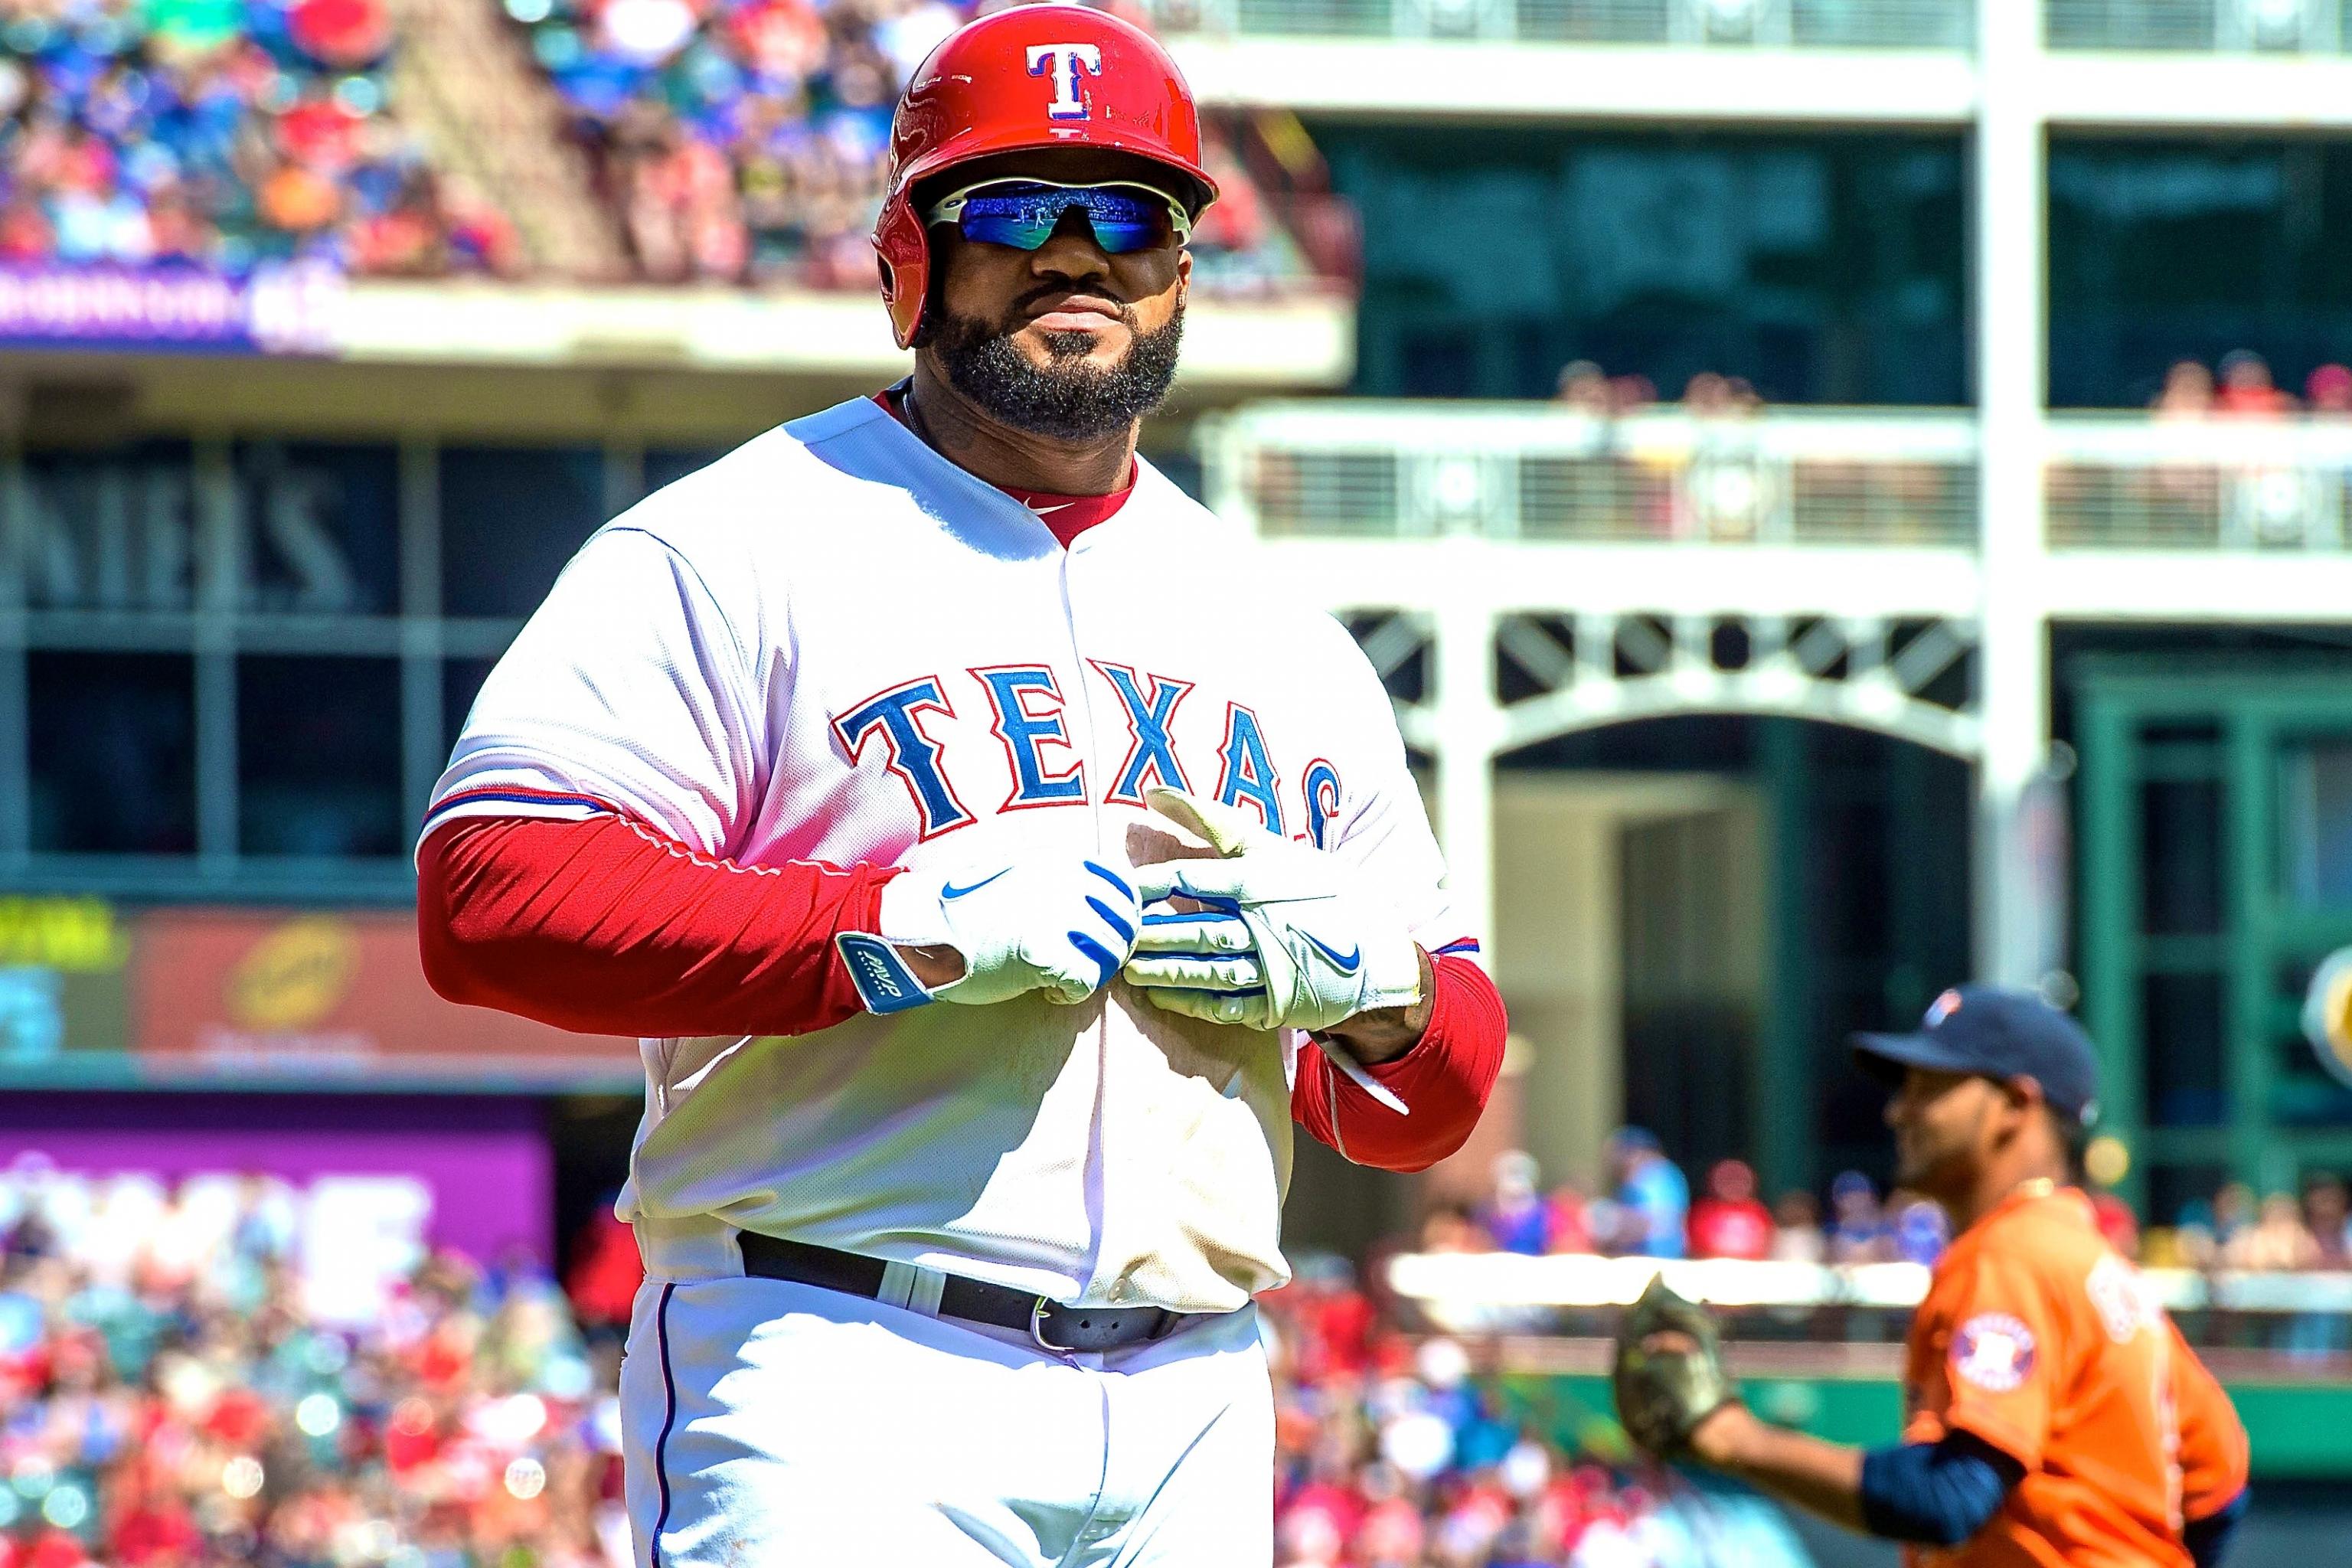 Prince Fielder injury: MLB, Rangers will miss his power - Sports Illustrated